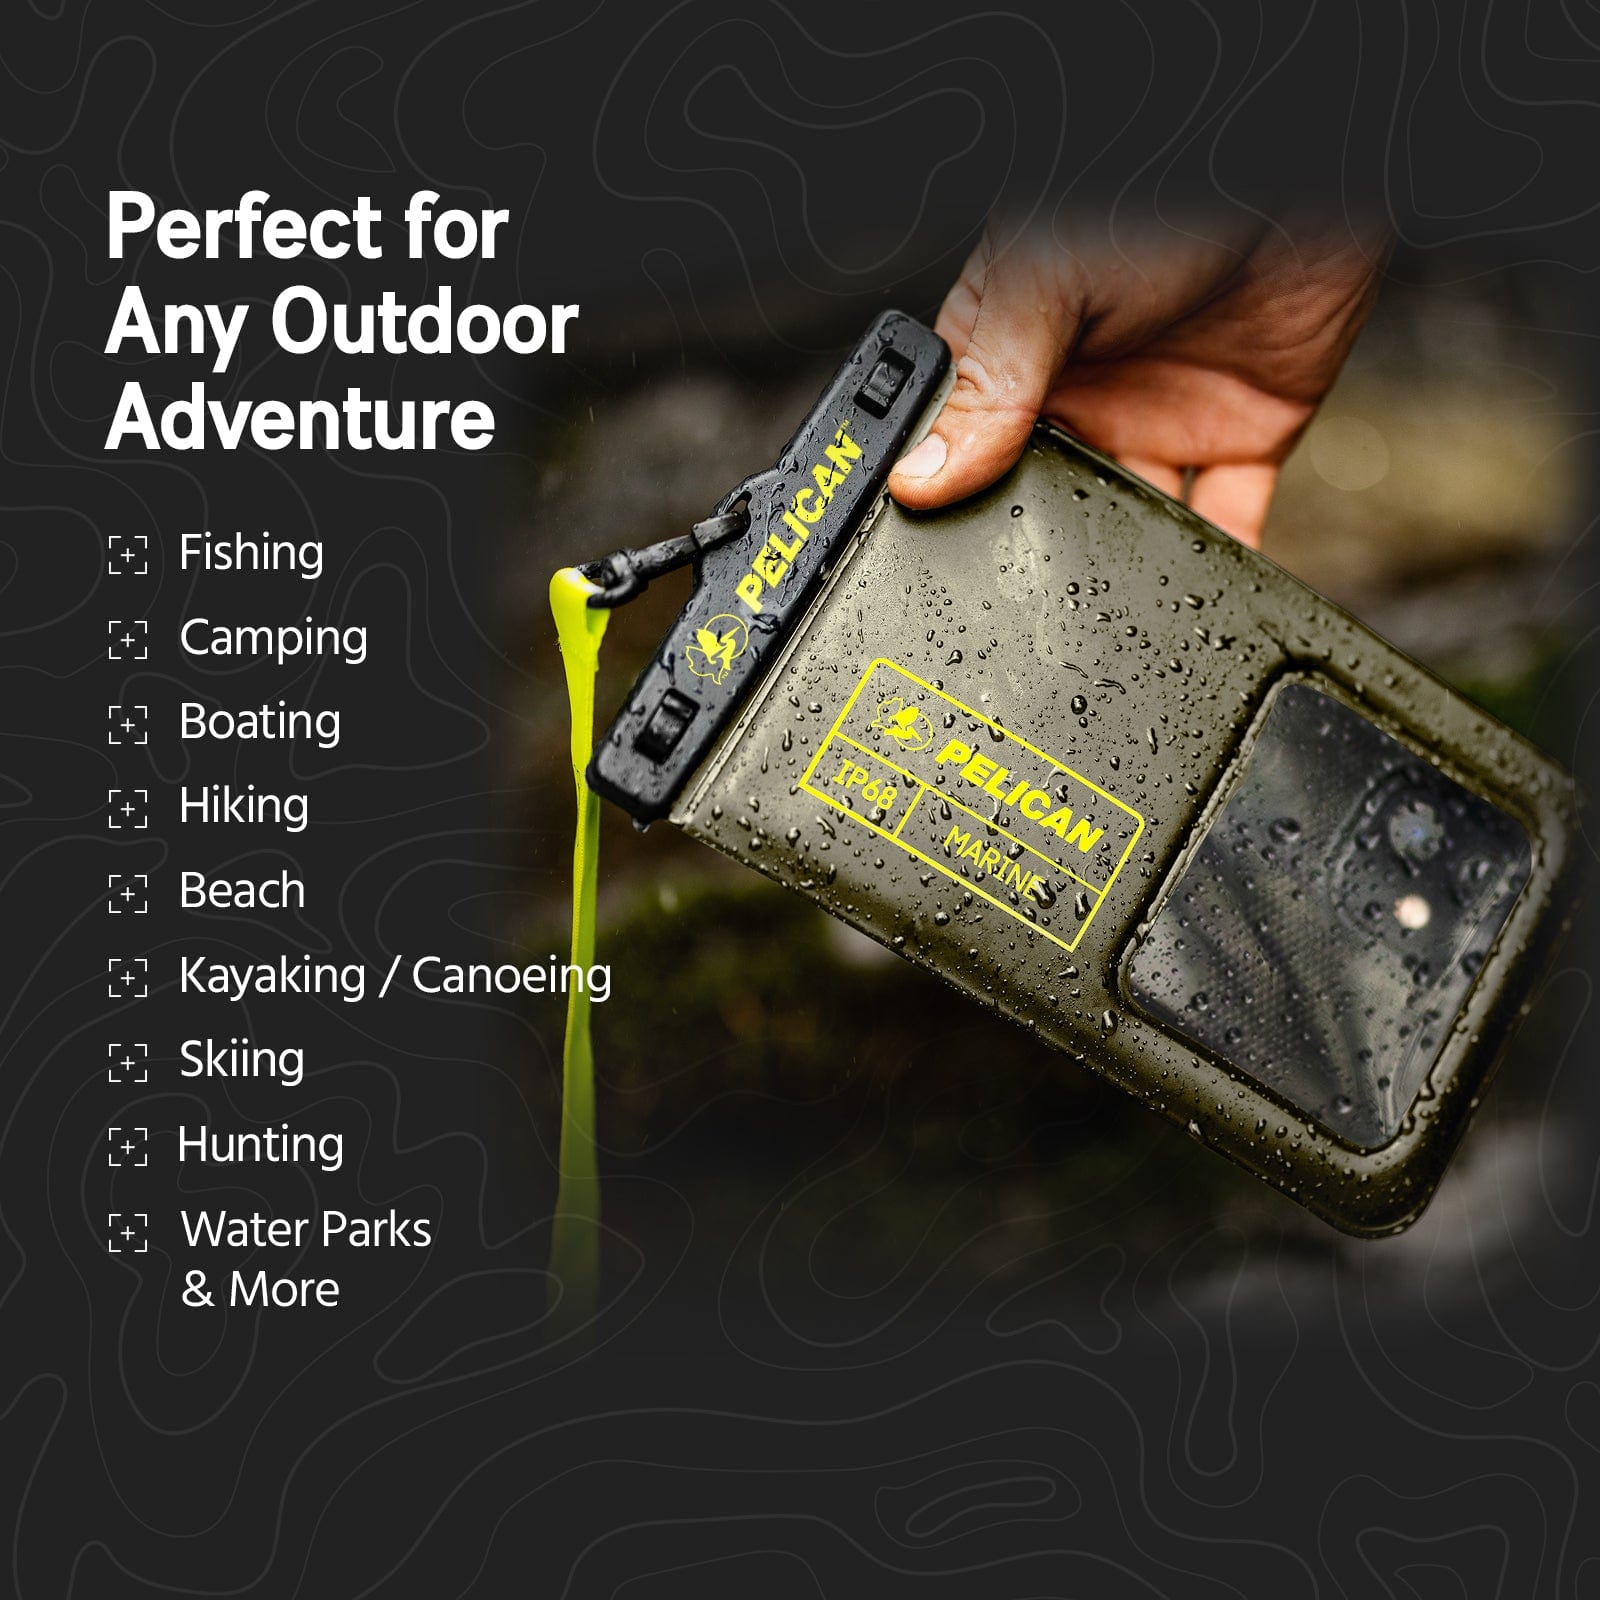 Perfect for any outdoor adventure: fishing, camping, boating, hiking, beach, kayaking / canoeing, skiing, hunting, waterparks & more